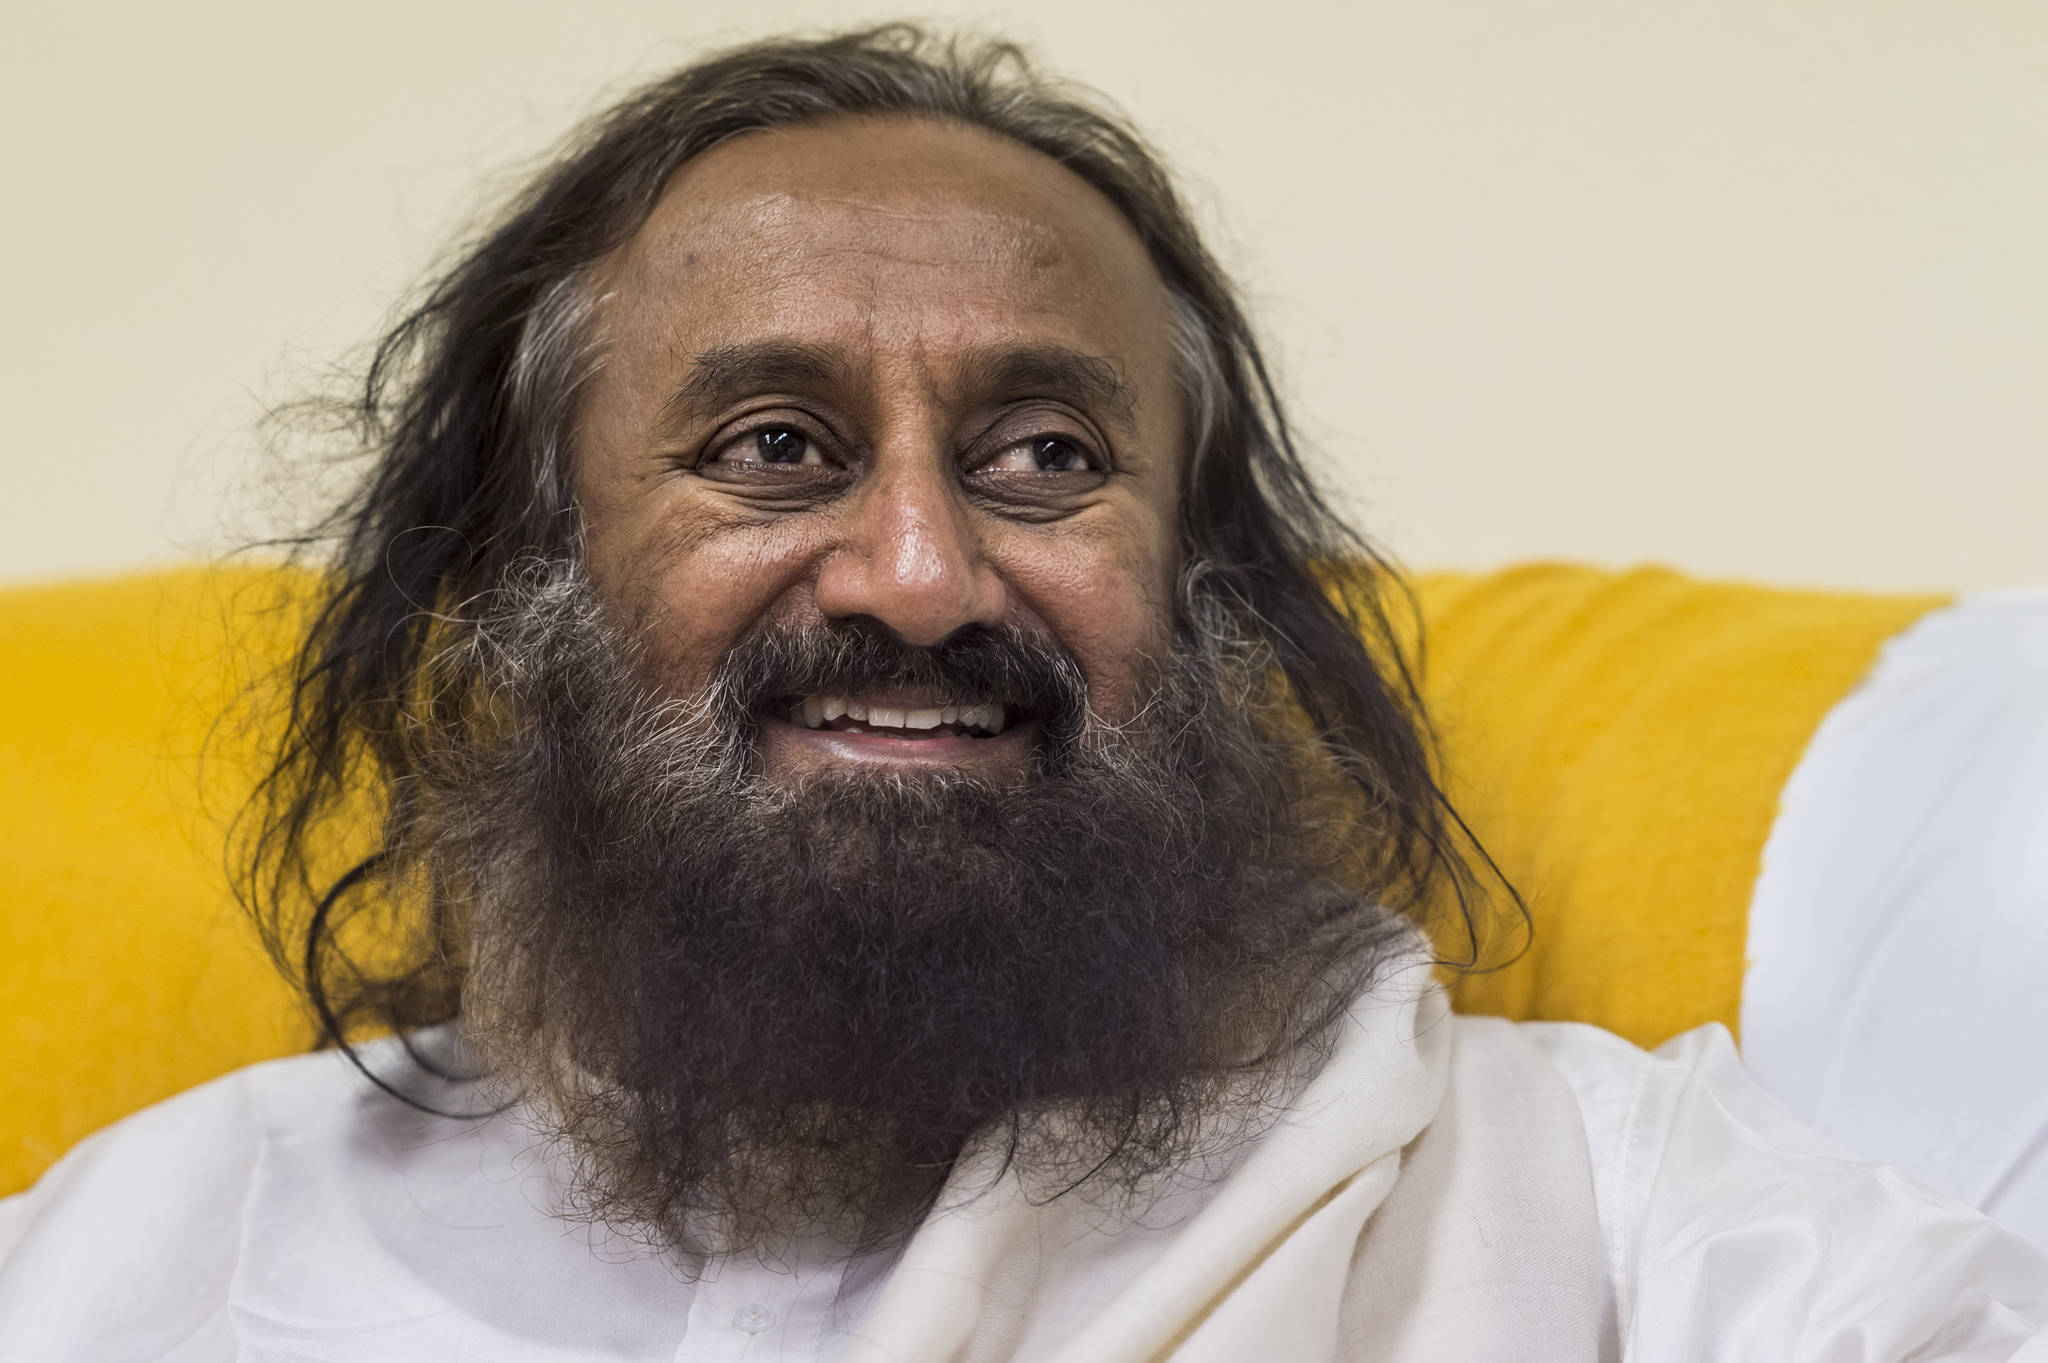 Spiritual leader Sri Sri Ravi Shankar of The Art of Living Foundation speaks during an interview at Juneau-Douglas High School on Tuesday, July 31, 2018, before leading a group meditation in the JDHS auditorium. (Michael Penn | Juneau Empire)